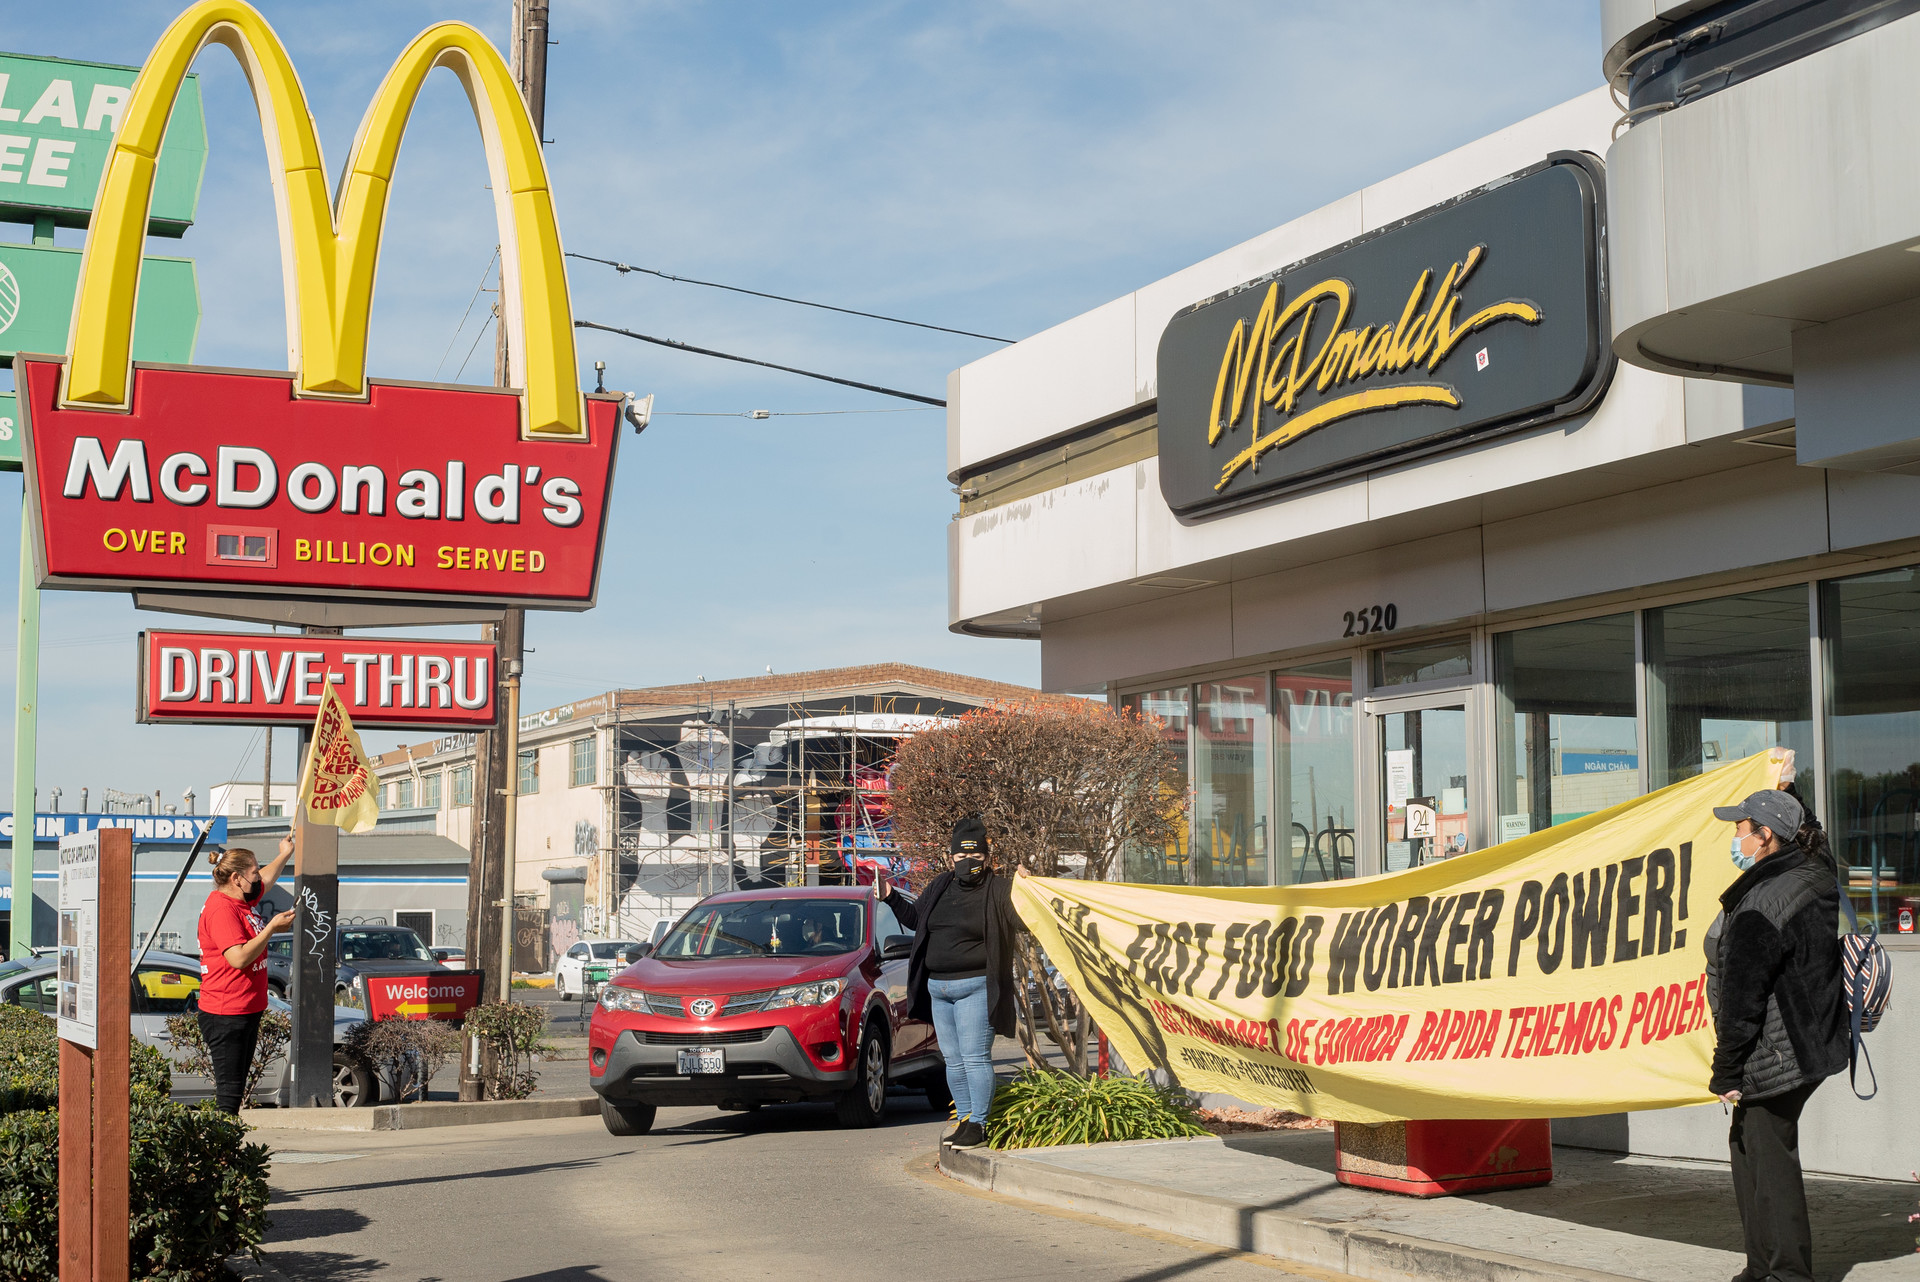 A McDonald's drive-thru is pictured where several protestors are seen holding a large yellow banner with black and red writing that reads, "Fast Food Worker Power!" A maroon SUV is pulling out of the drive-thru.